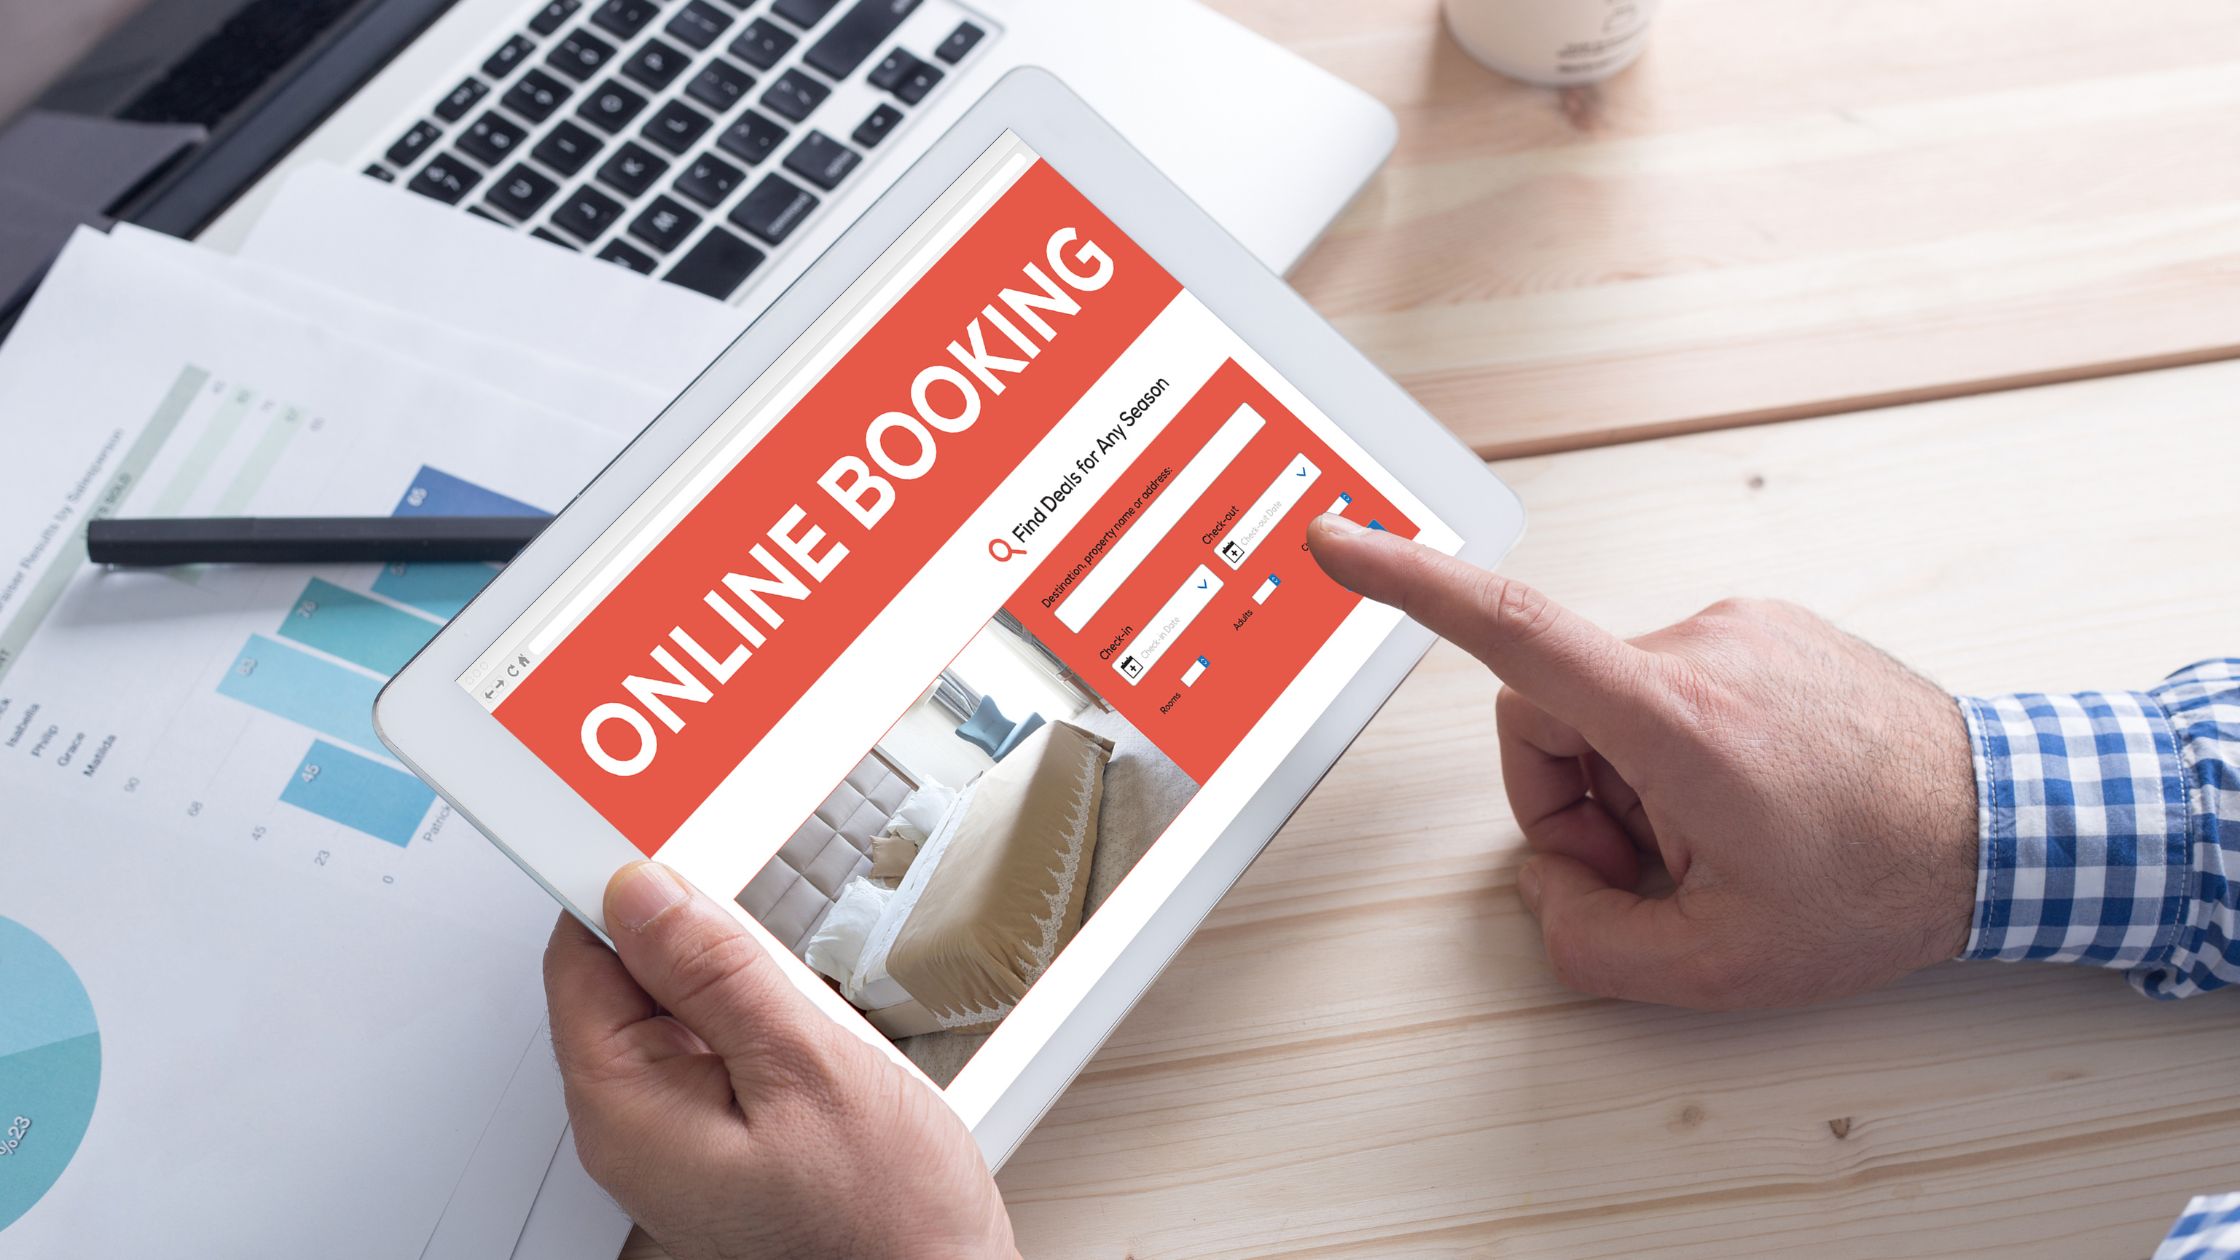 A person carefully making an online hotel booking on a safe site via an ipad